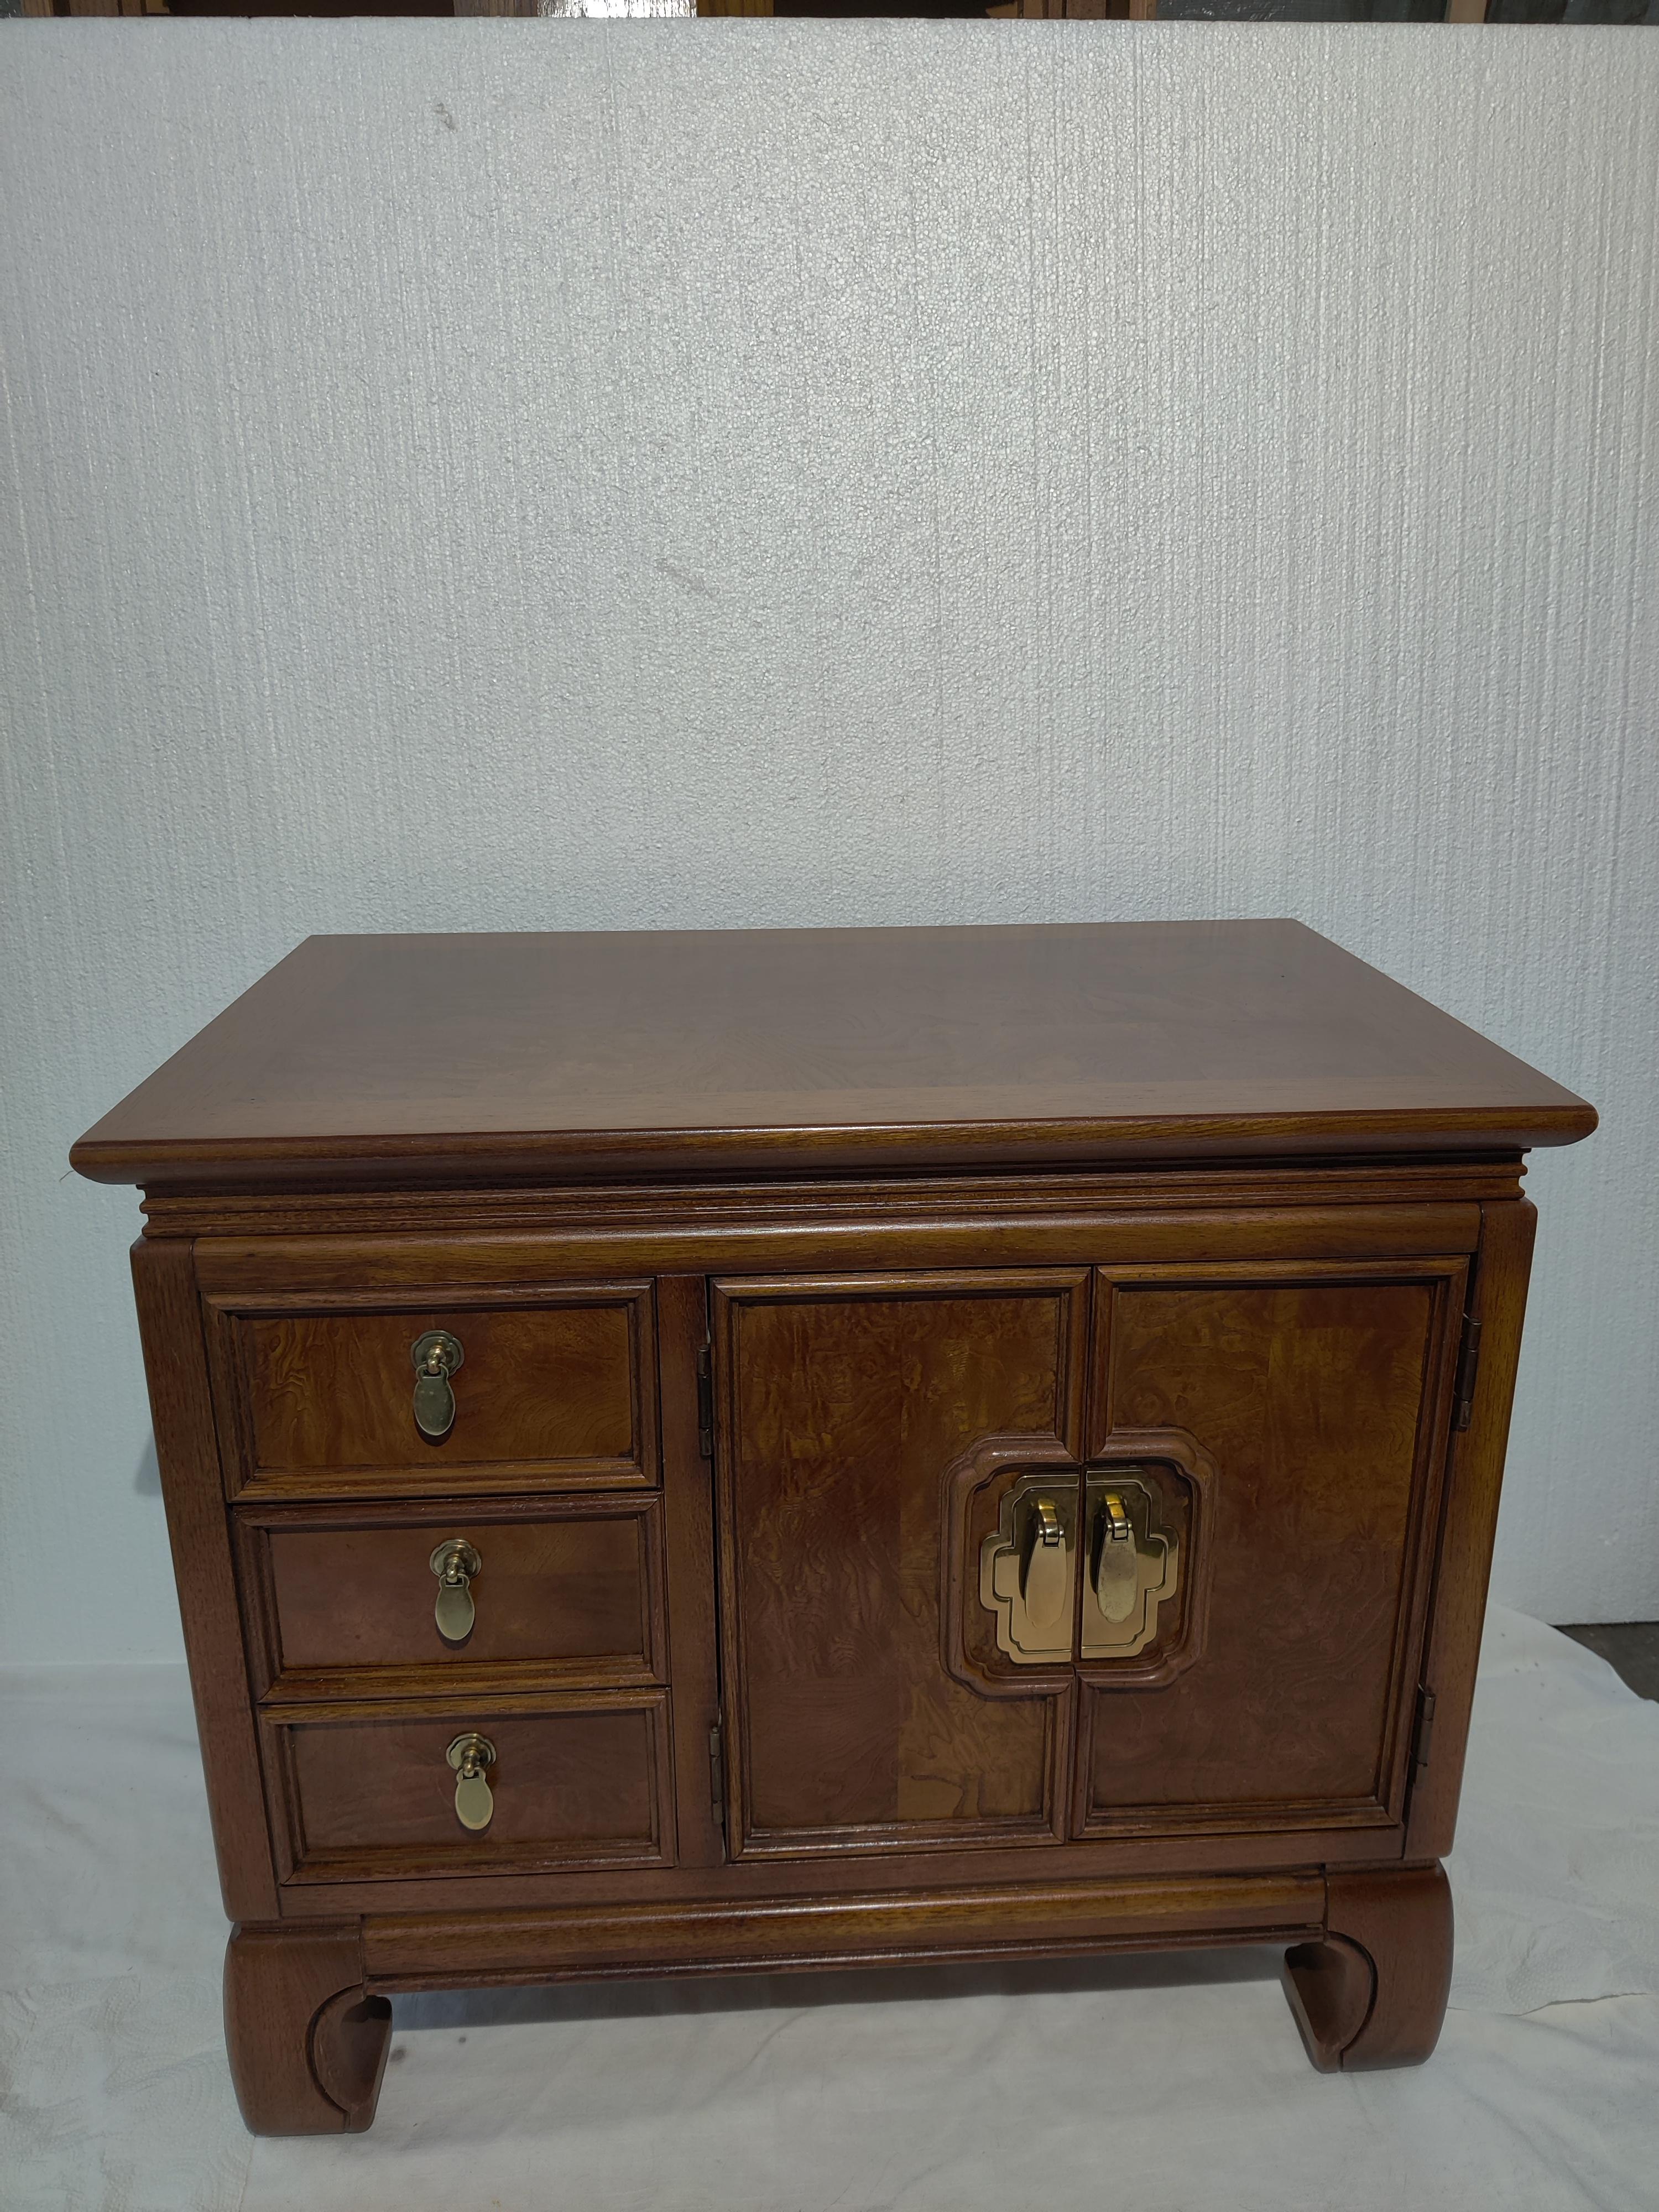 Thomasville Mystique Chinoiserie Solid Cherry End Table / Nightstand In Good Condition For Sale In Cincinnati, OH